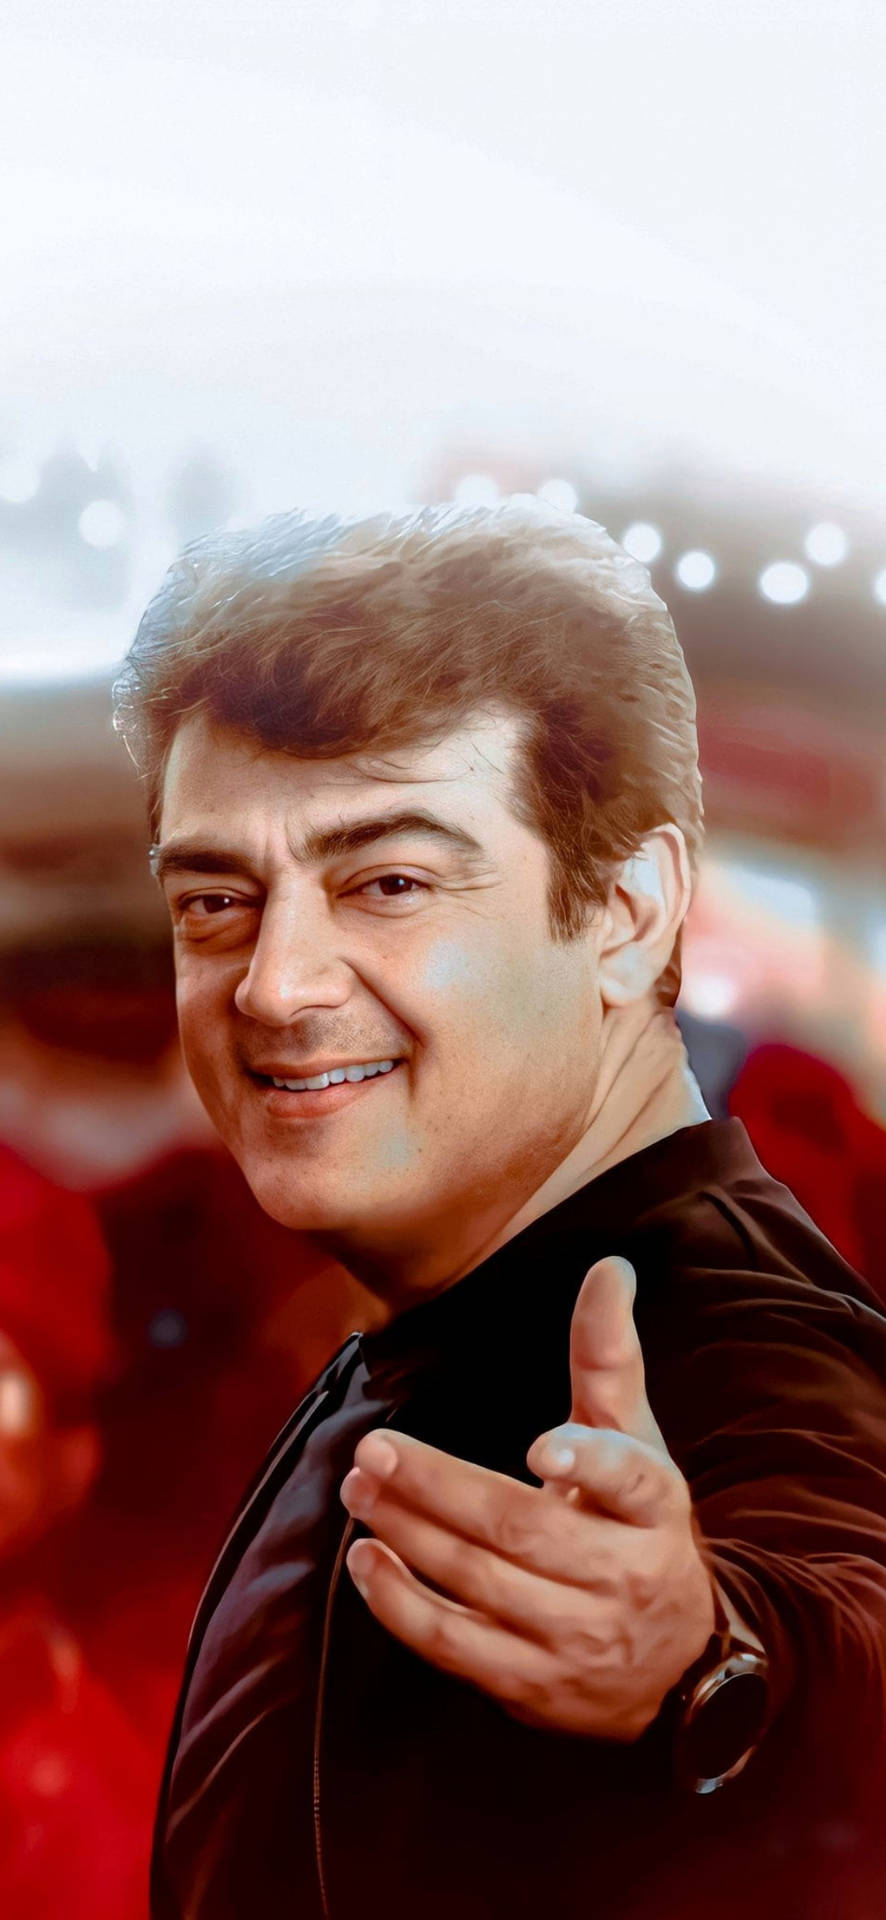 Thala Ajith's Intriguing Look From Valimai Film Background